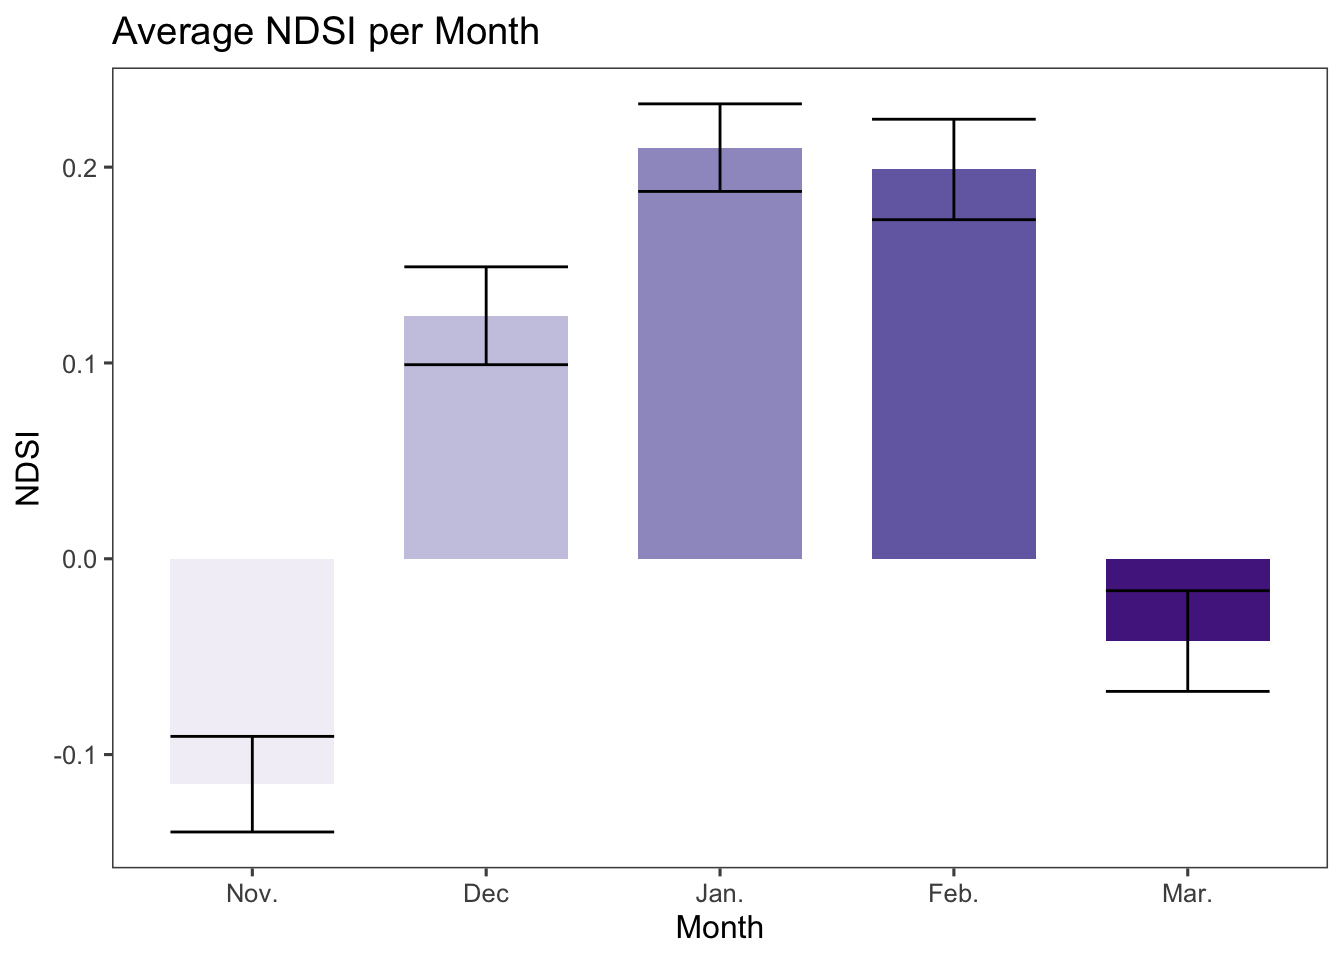 Mean NDSI and standard error per winter month across sites from 1984 to 2019.